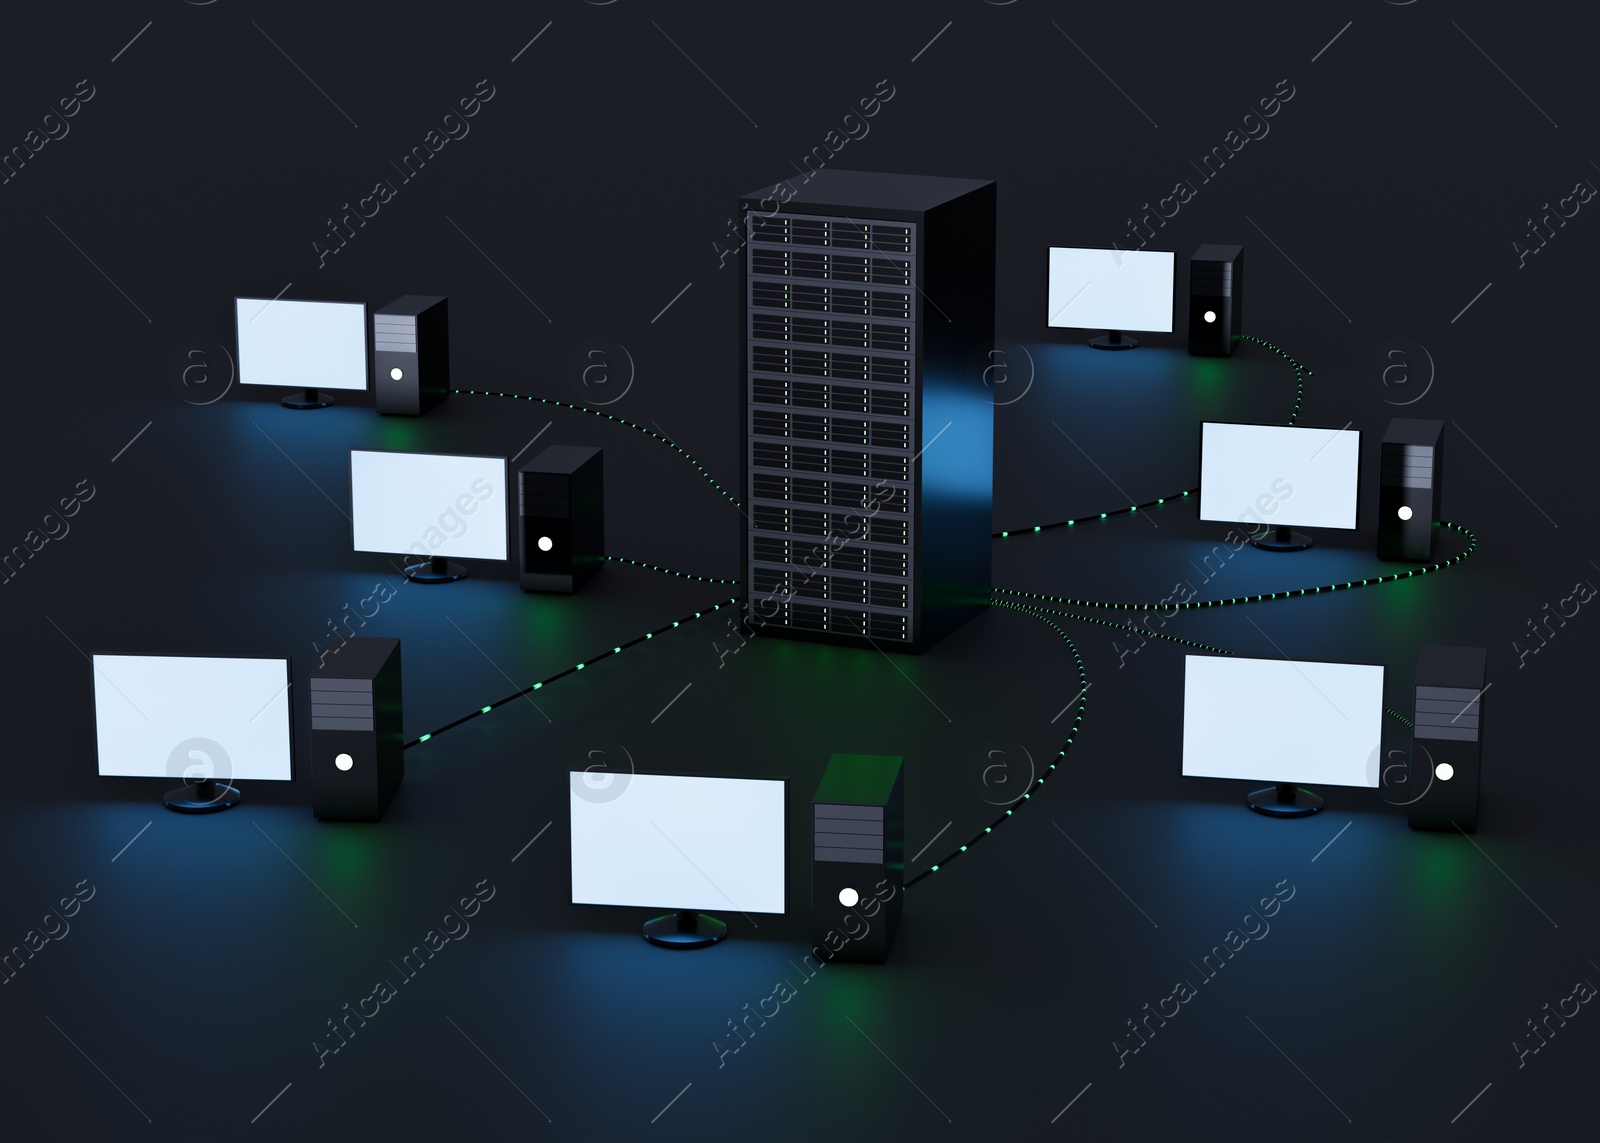 Illustration of Computers connected with server on dark background, illustration. Multi-user system